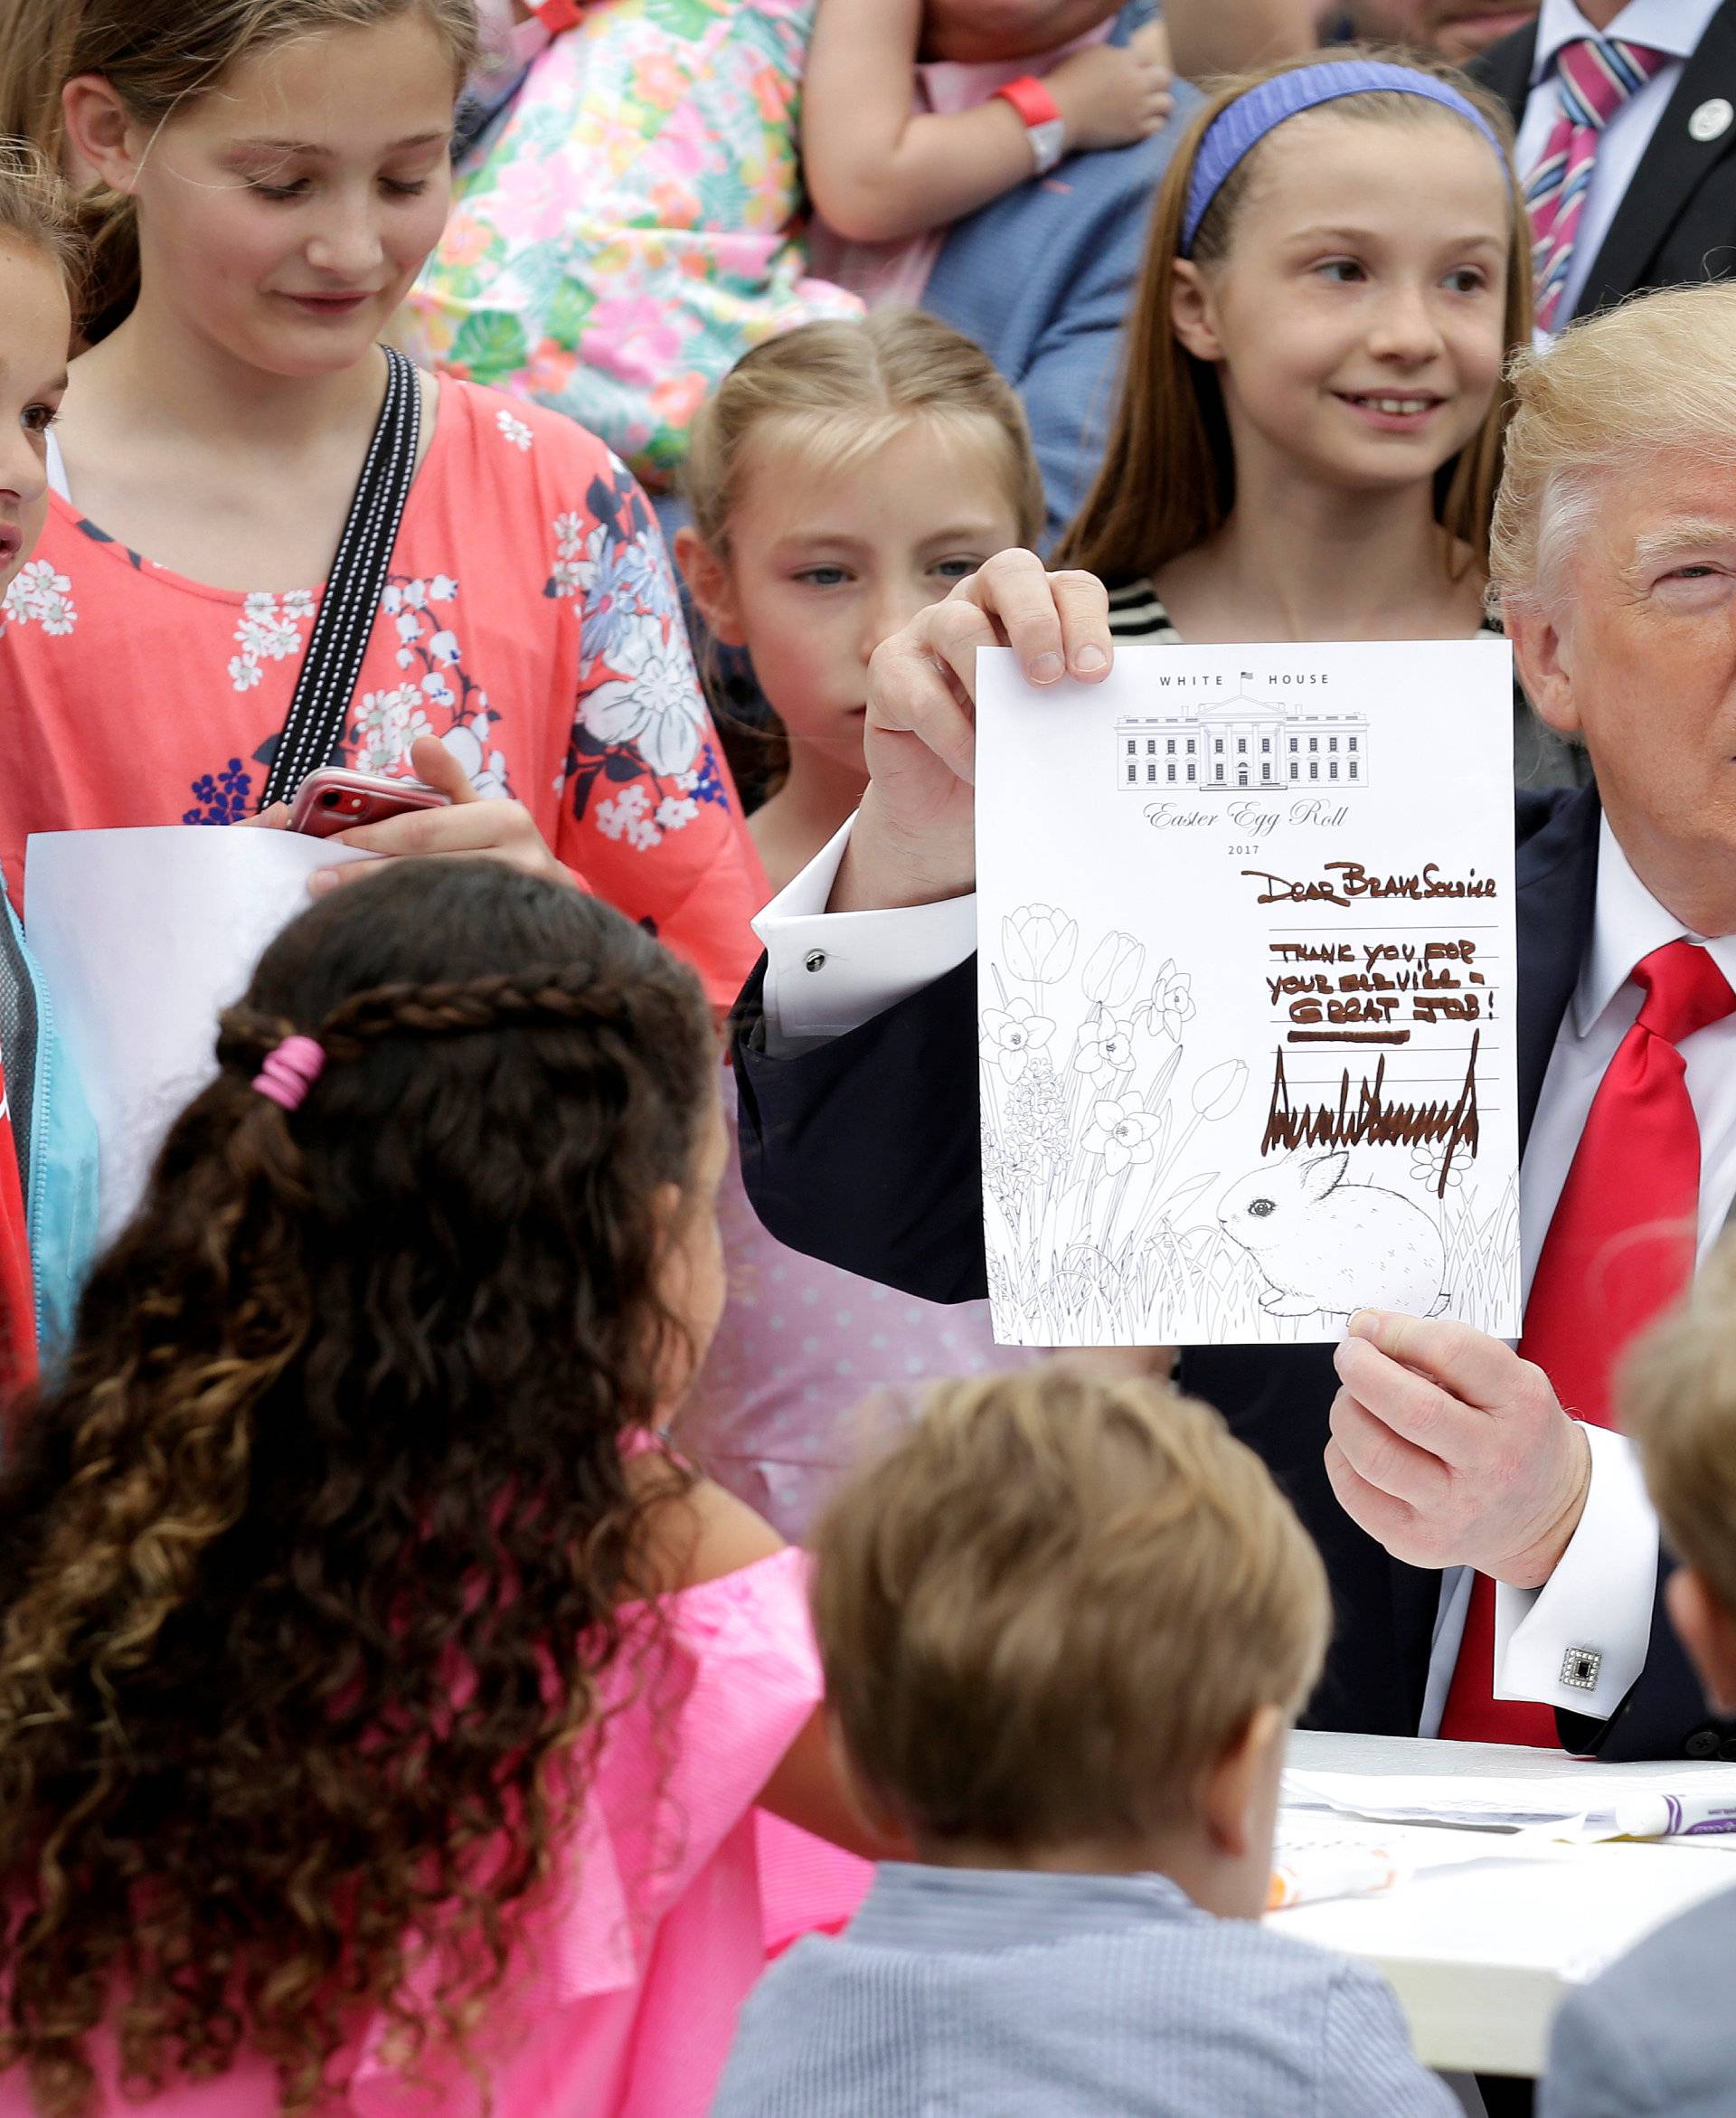 U.S. President Donald Trump holds an Easter greeting card he made that will be sent to a member of the military at the 139th annual White House Easter Egg Roll on the South Lawn of the White House in Washington